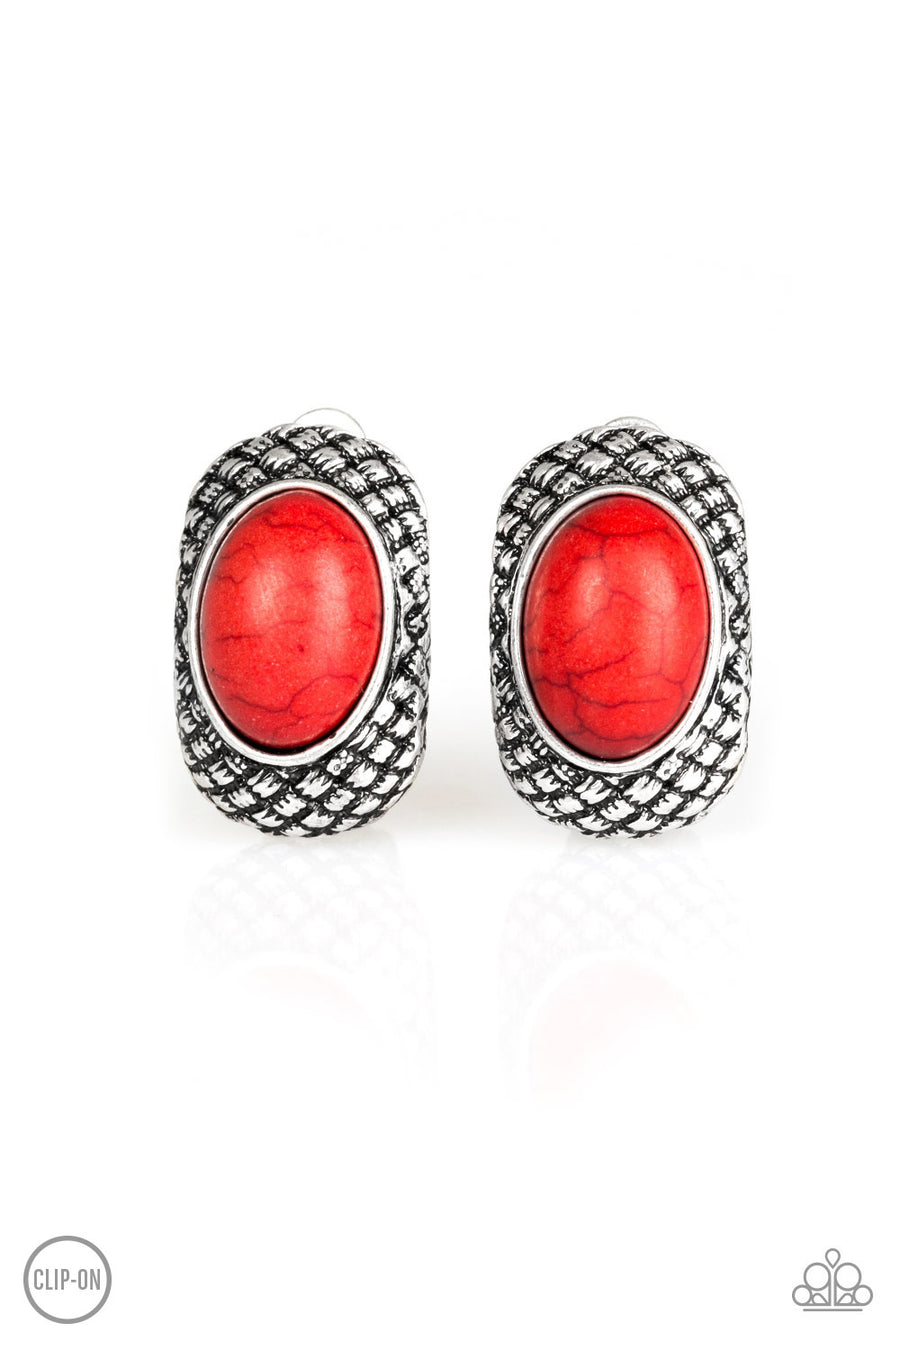 Bedrock Bombshell - Red Clip-On Earrings  - Paparazzi Accessories